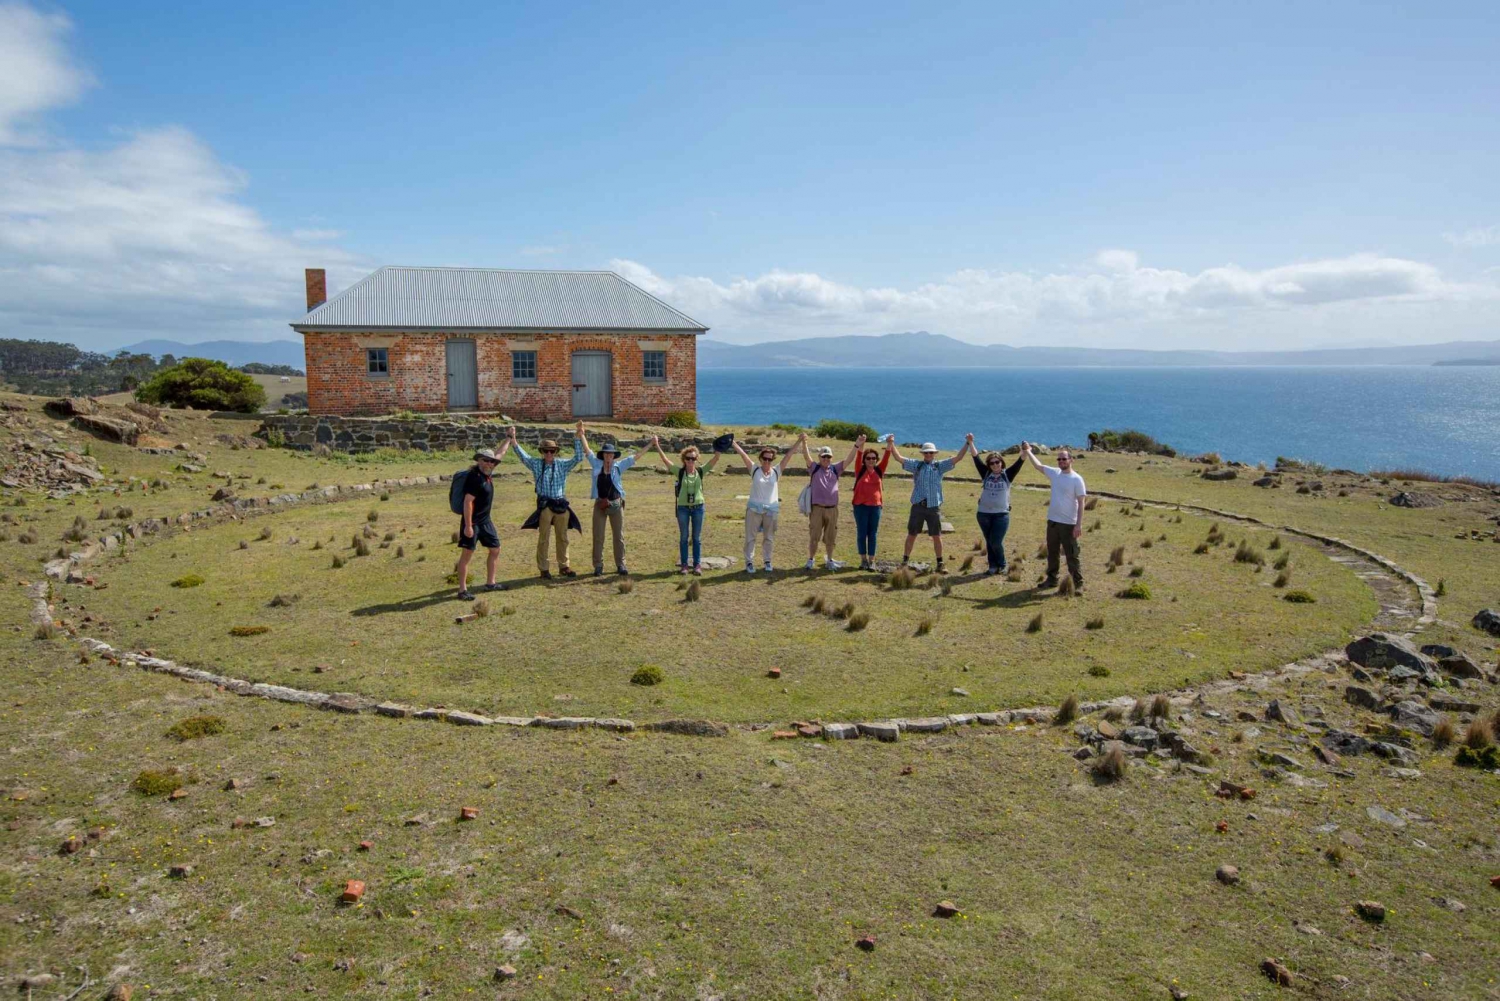 From Hobart: Maria Island National Park Active Full-Day Tour